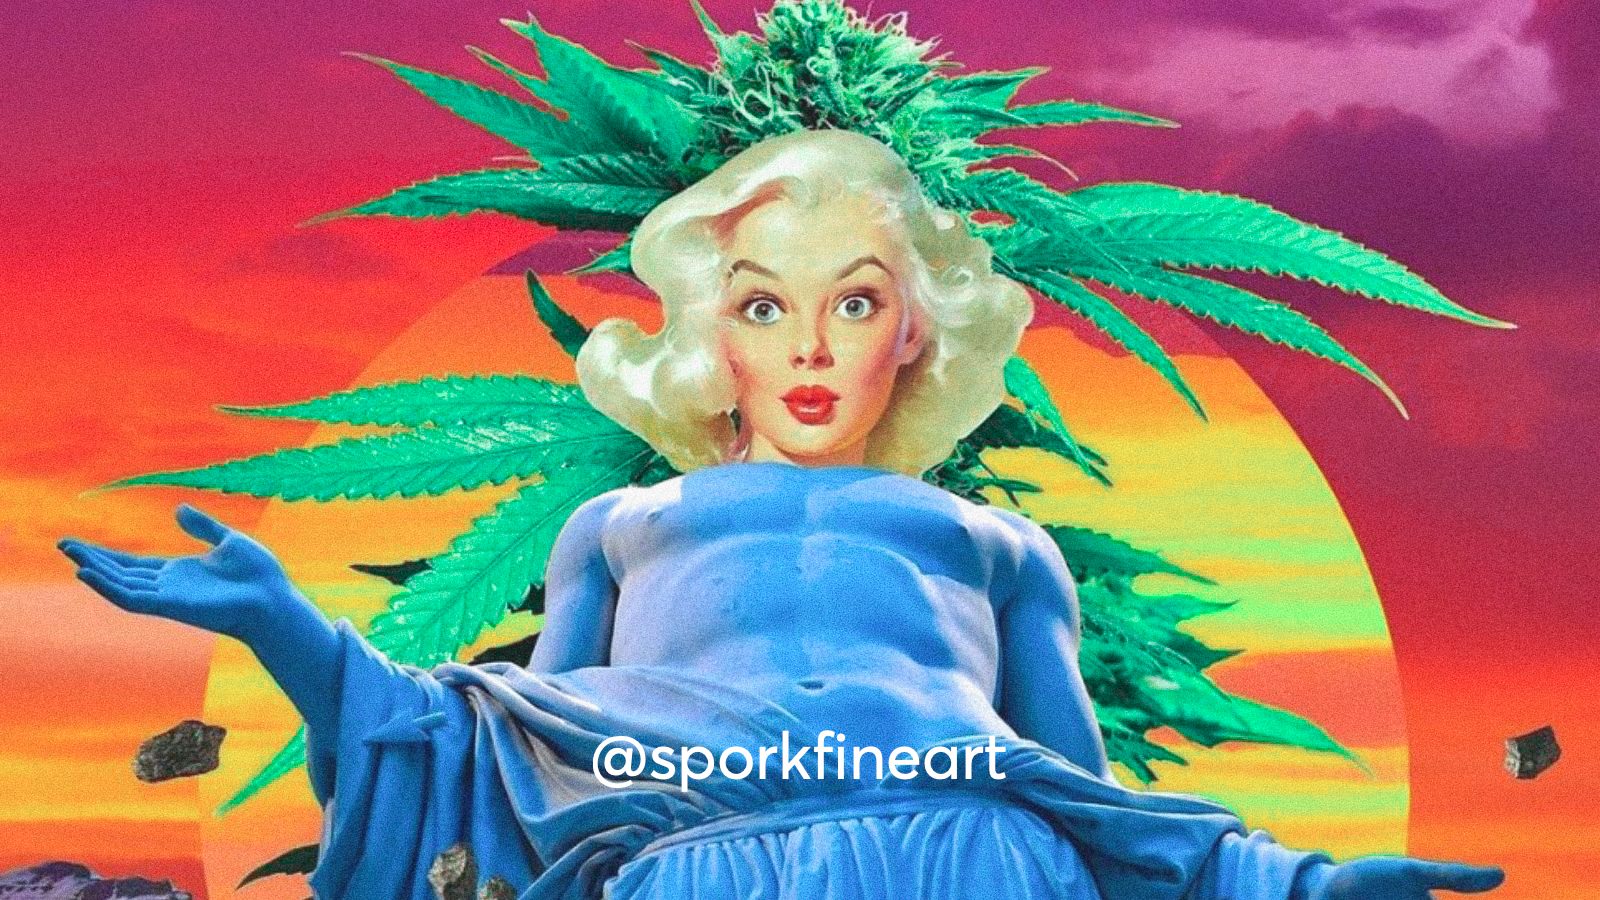 A collage art of a woman standing in front of a giant cannabis flower with teh sun in the background; vintage retro collage art.